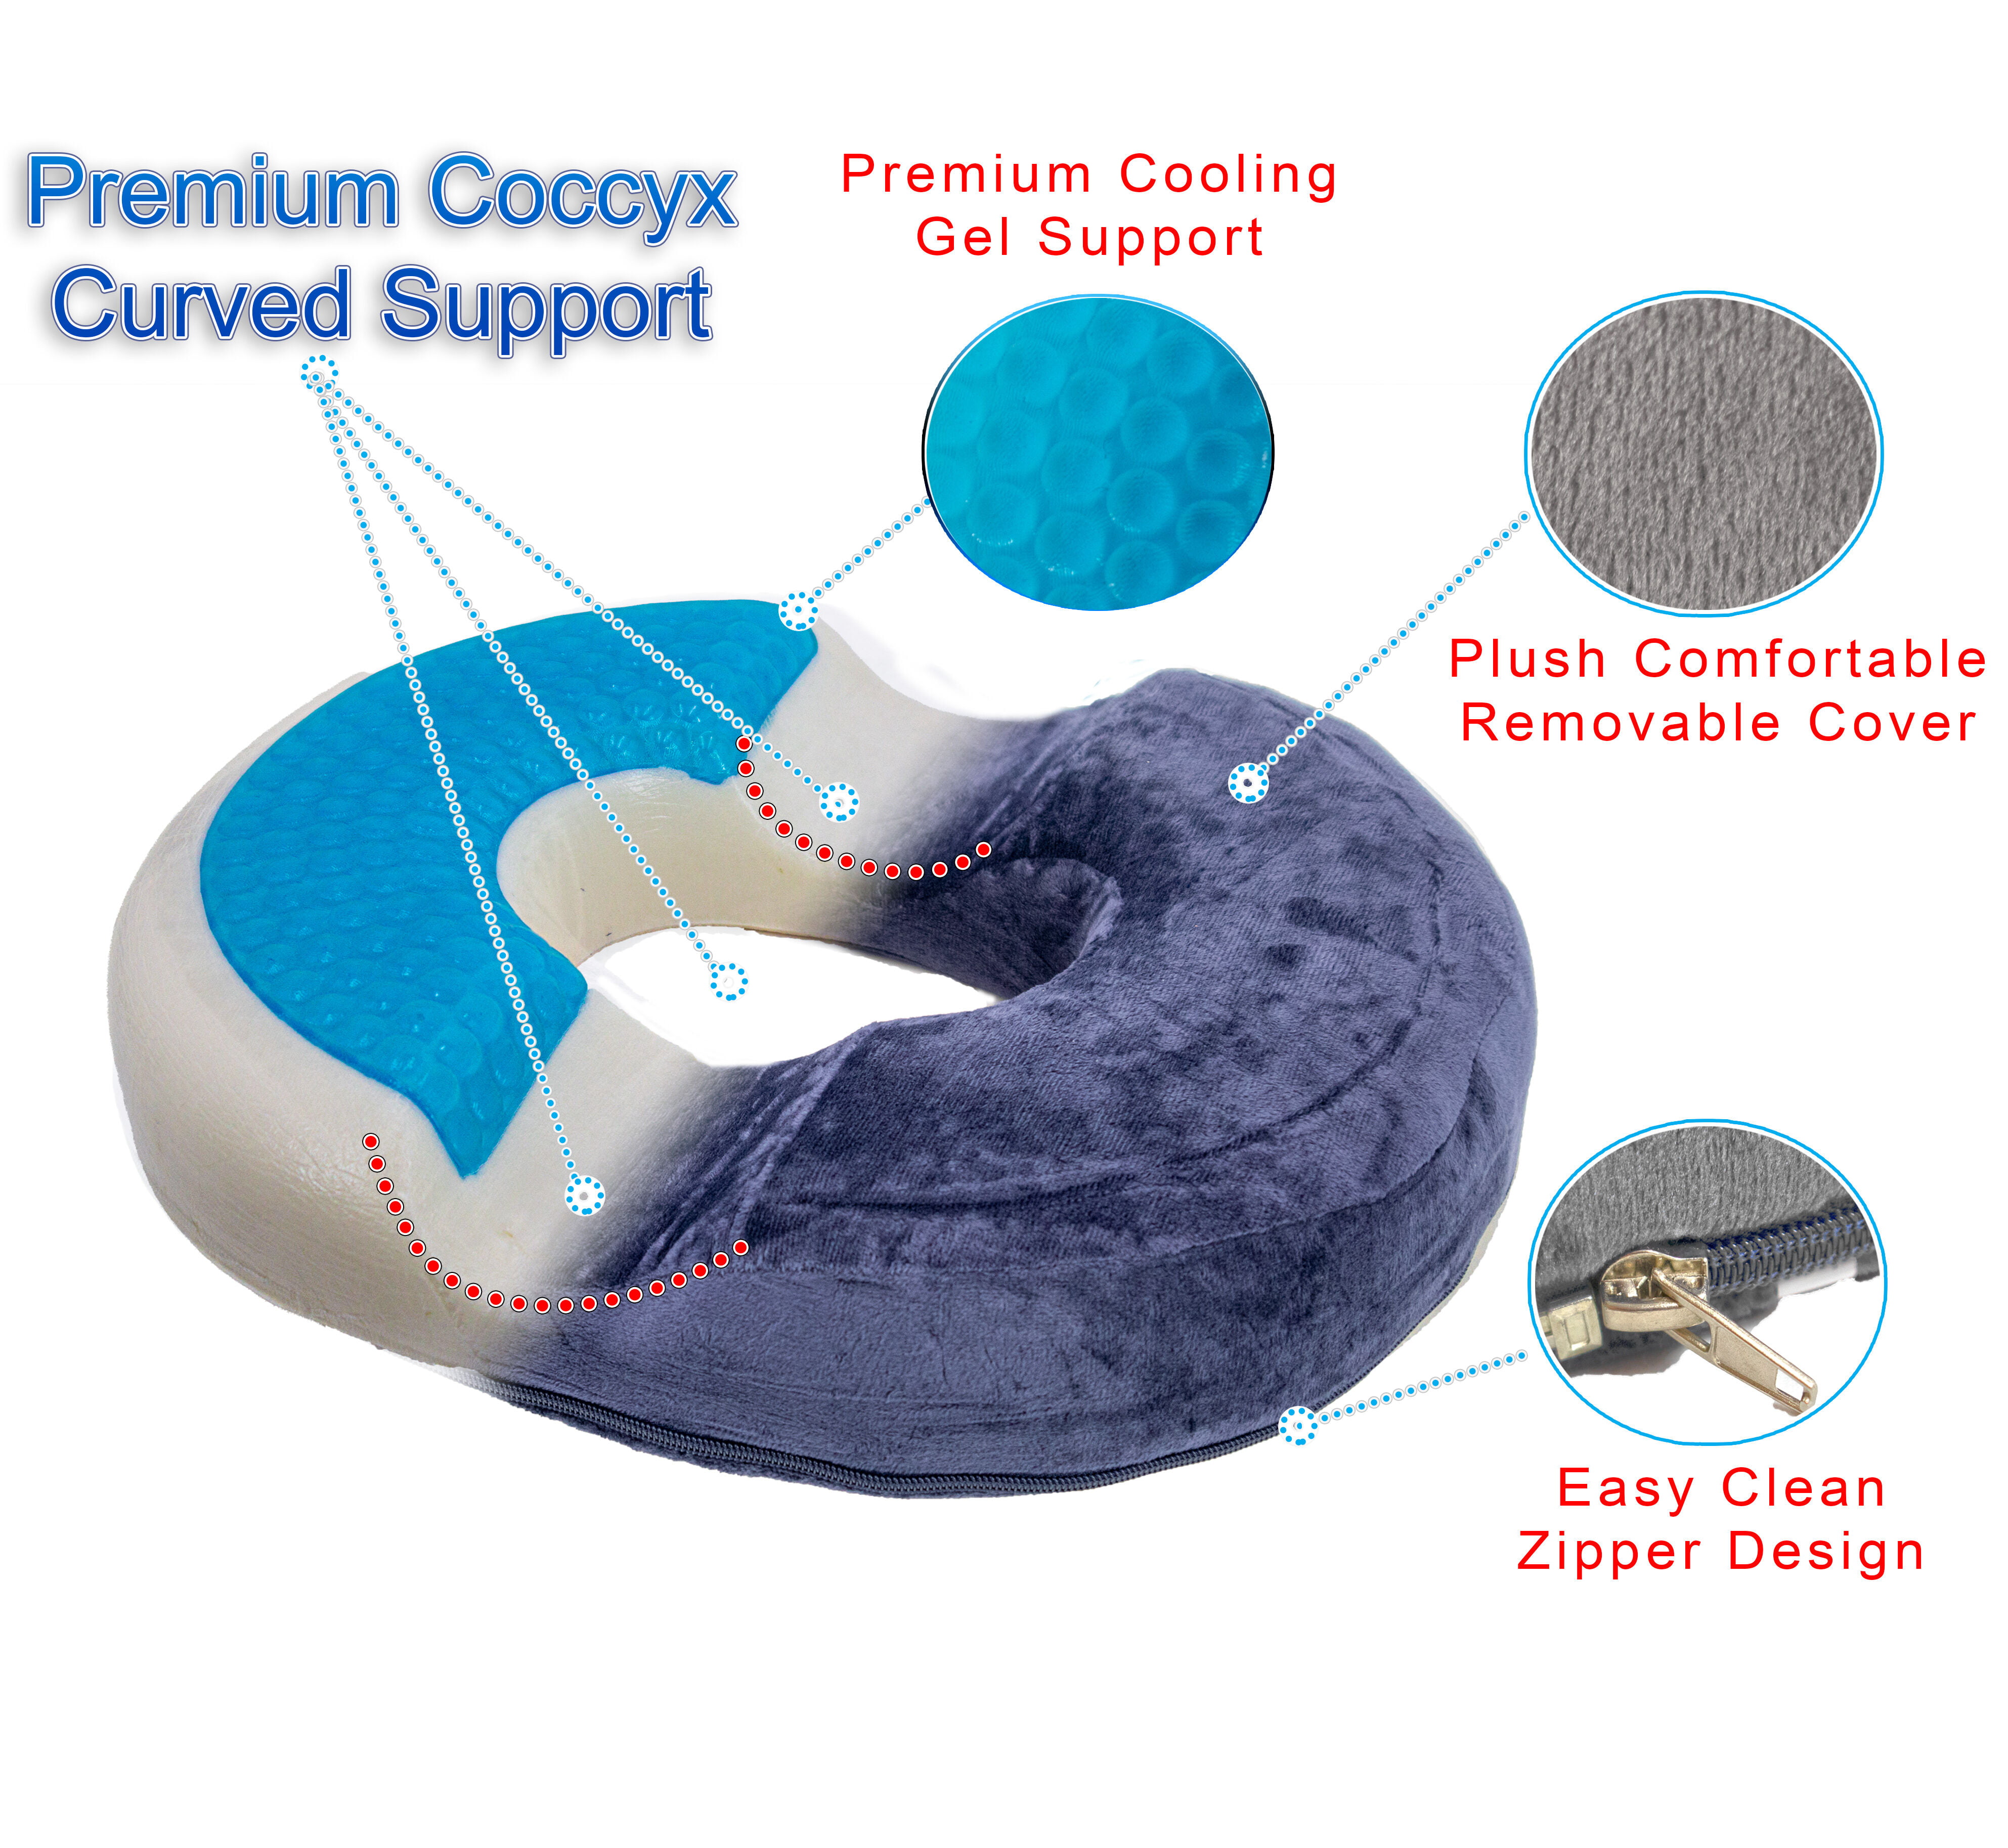 Gel Seat Cushion for Office Chairs Donut Pillow Hemorrhoid